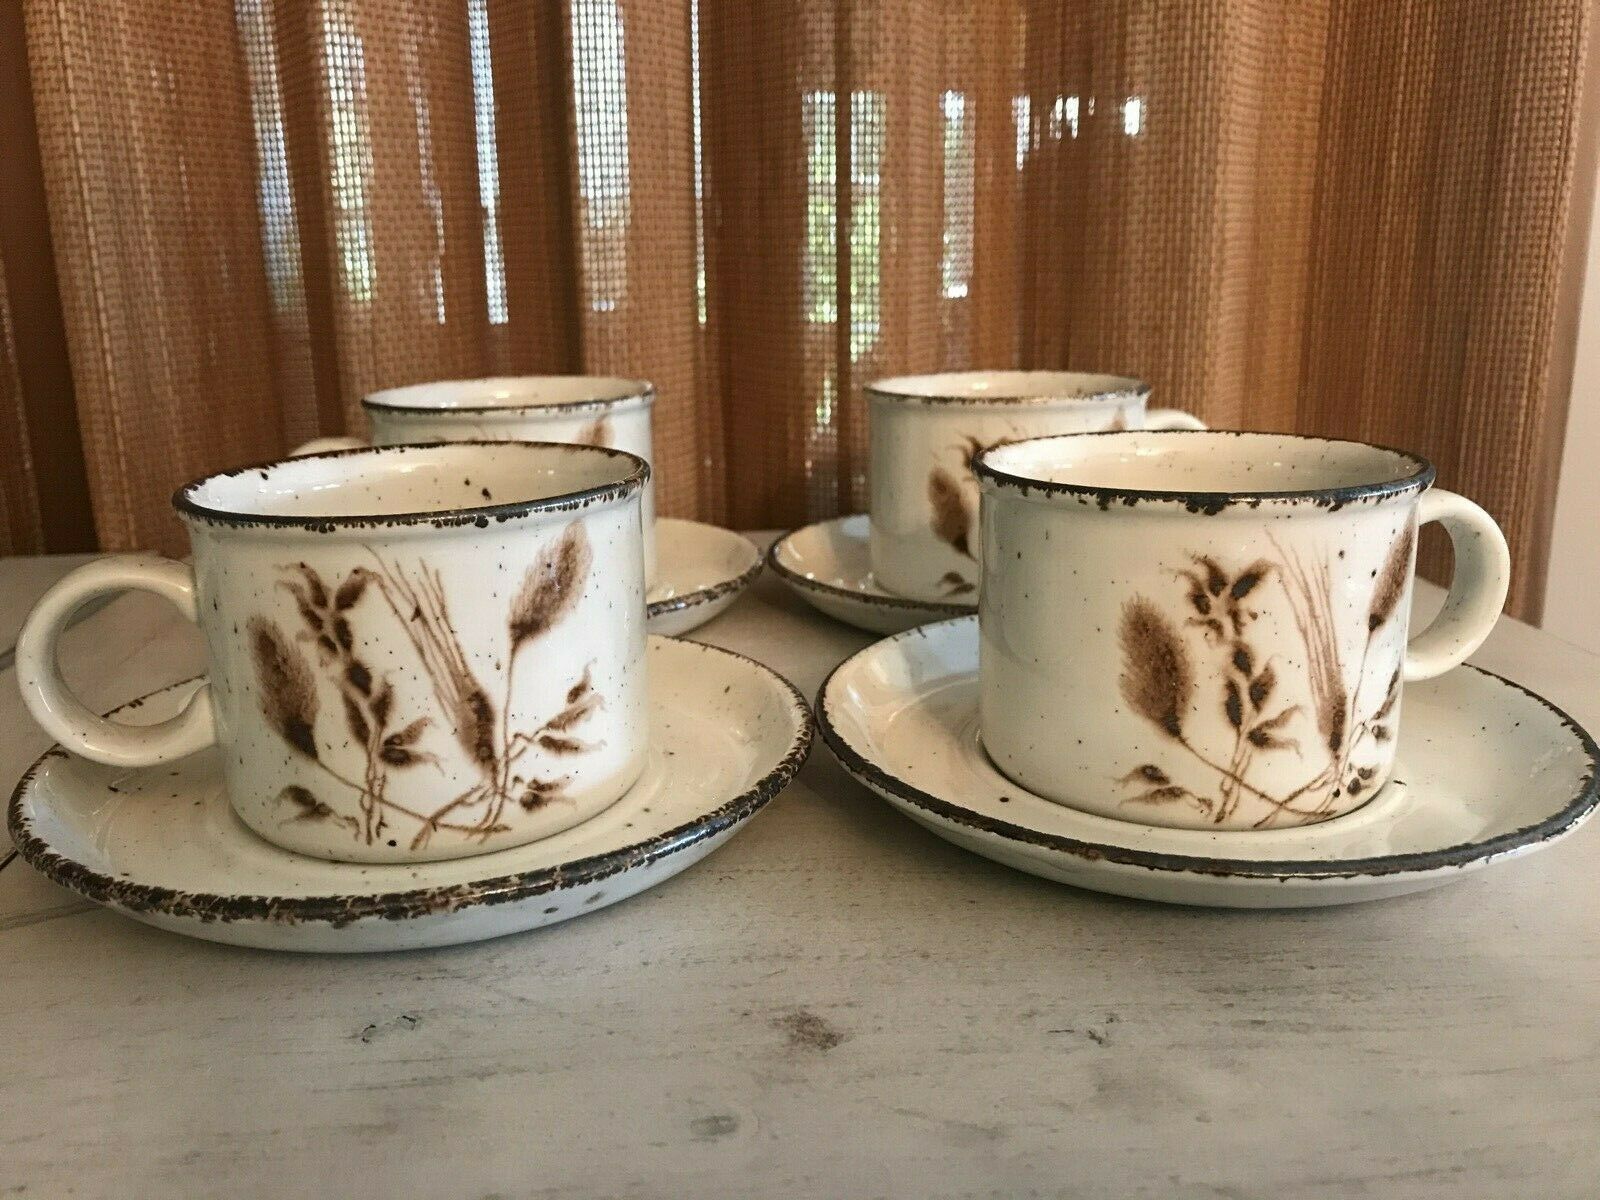 Midwinter England Stonehenge Wild Oats - Set Of 4 Cup & Saucer Sets